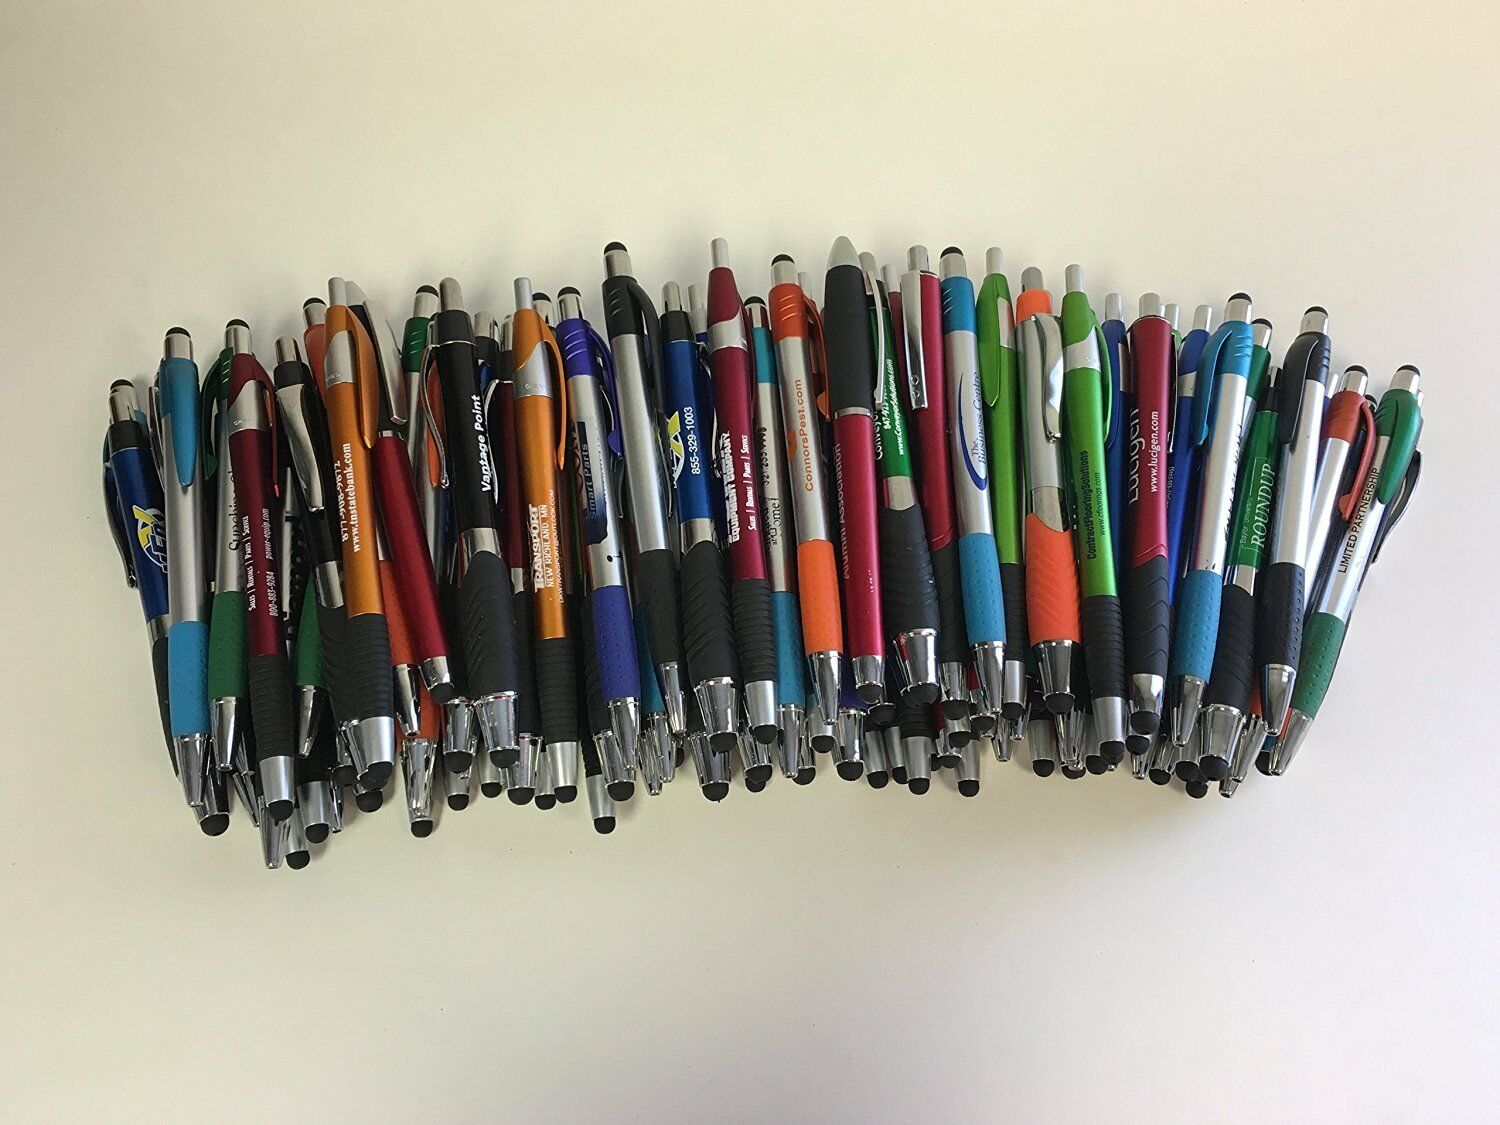 100 Lot Misprint Ink Pens With Soft Tip Stylus For Touch Screen, Assorted Barrel